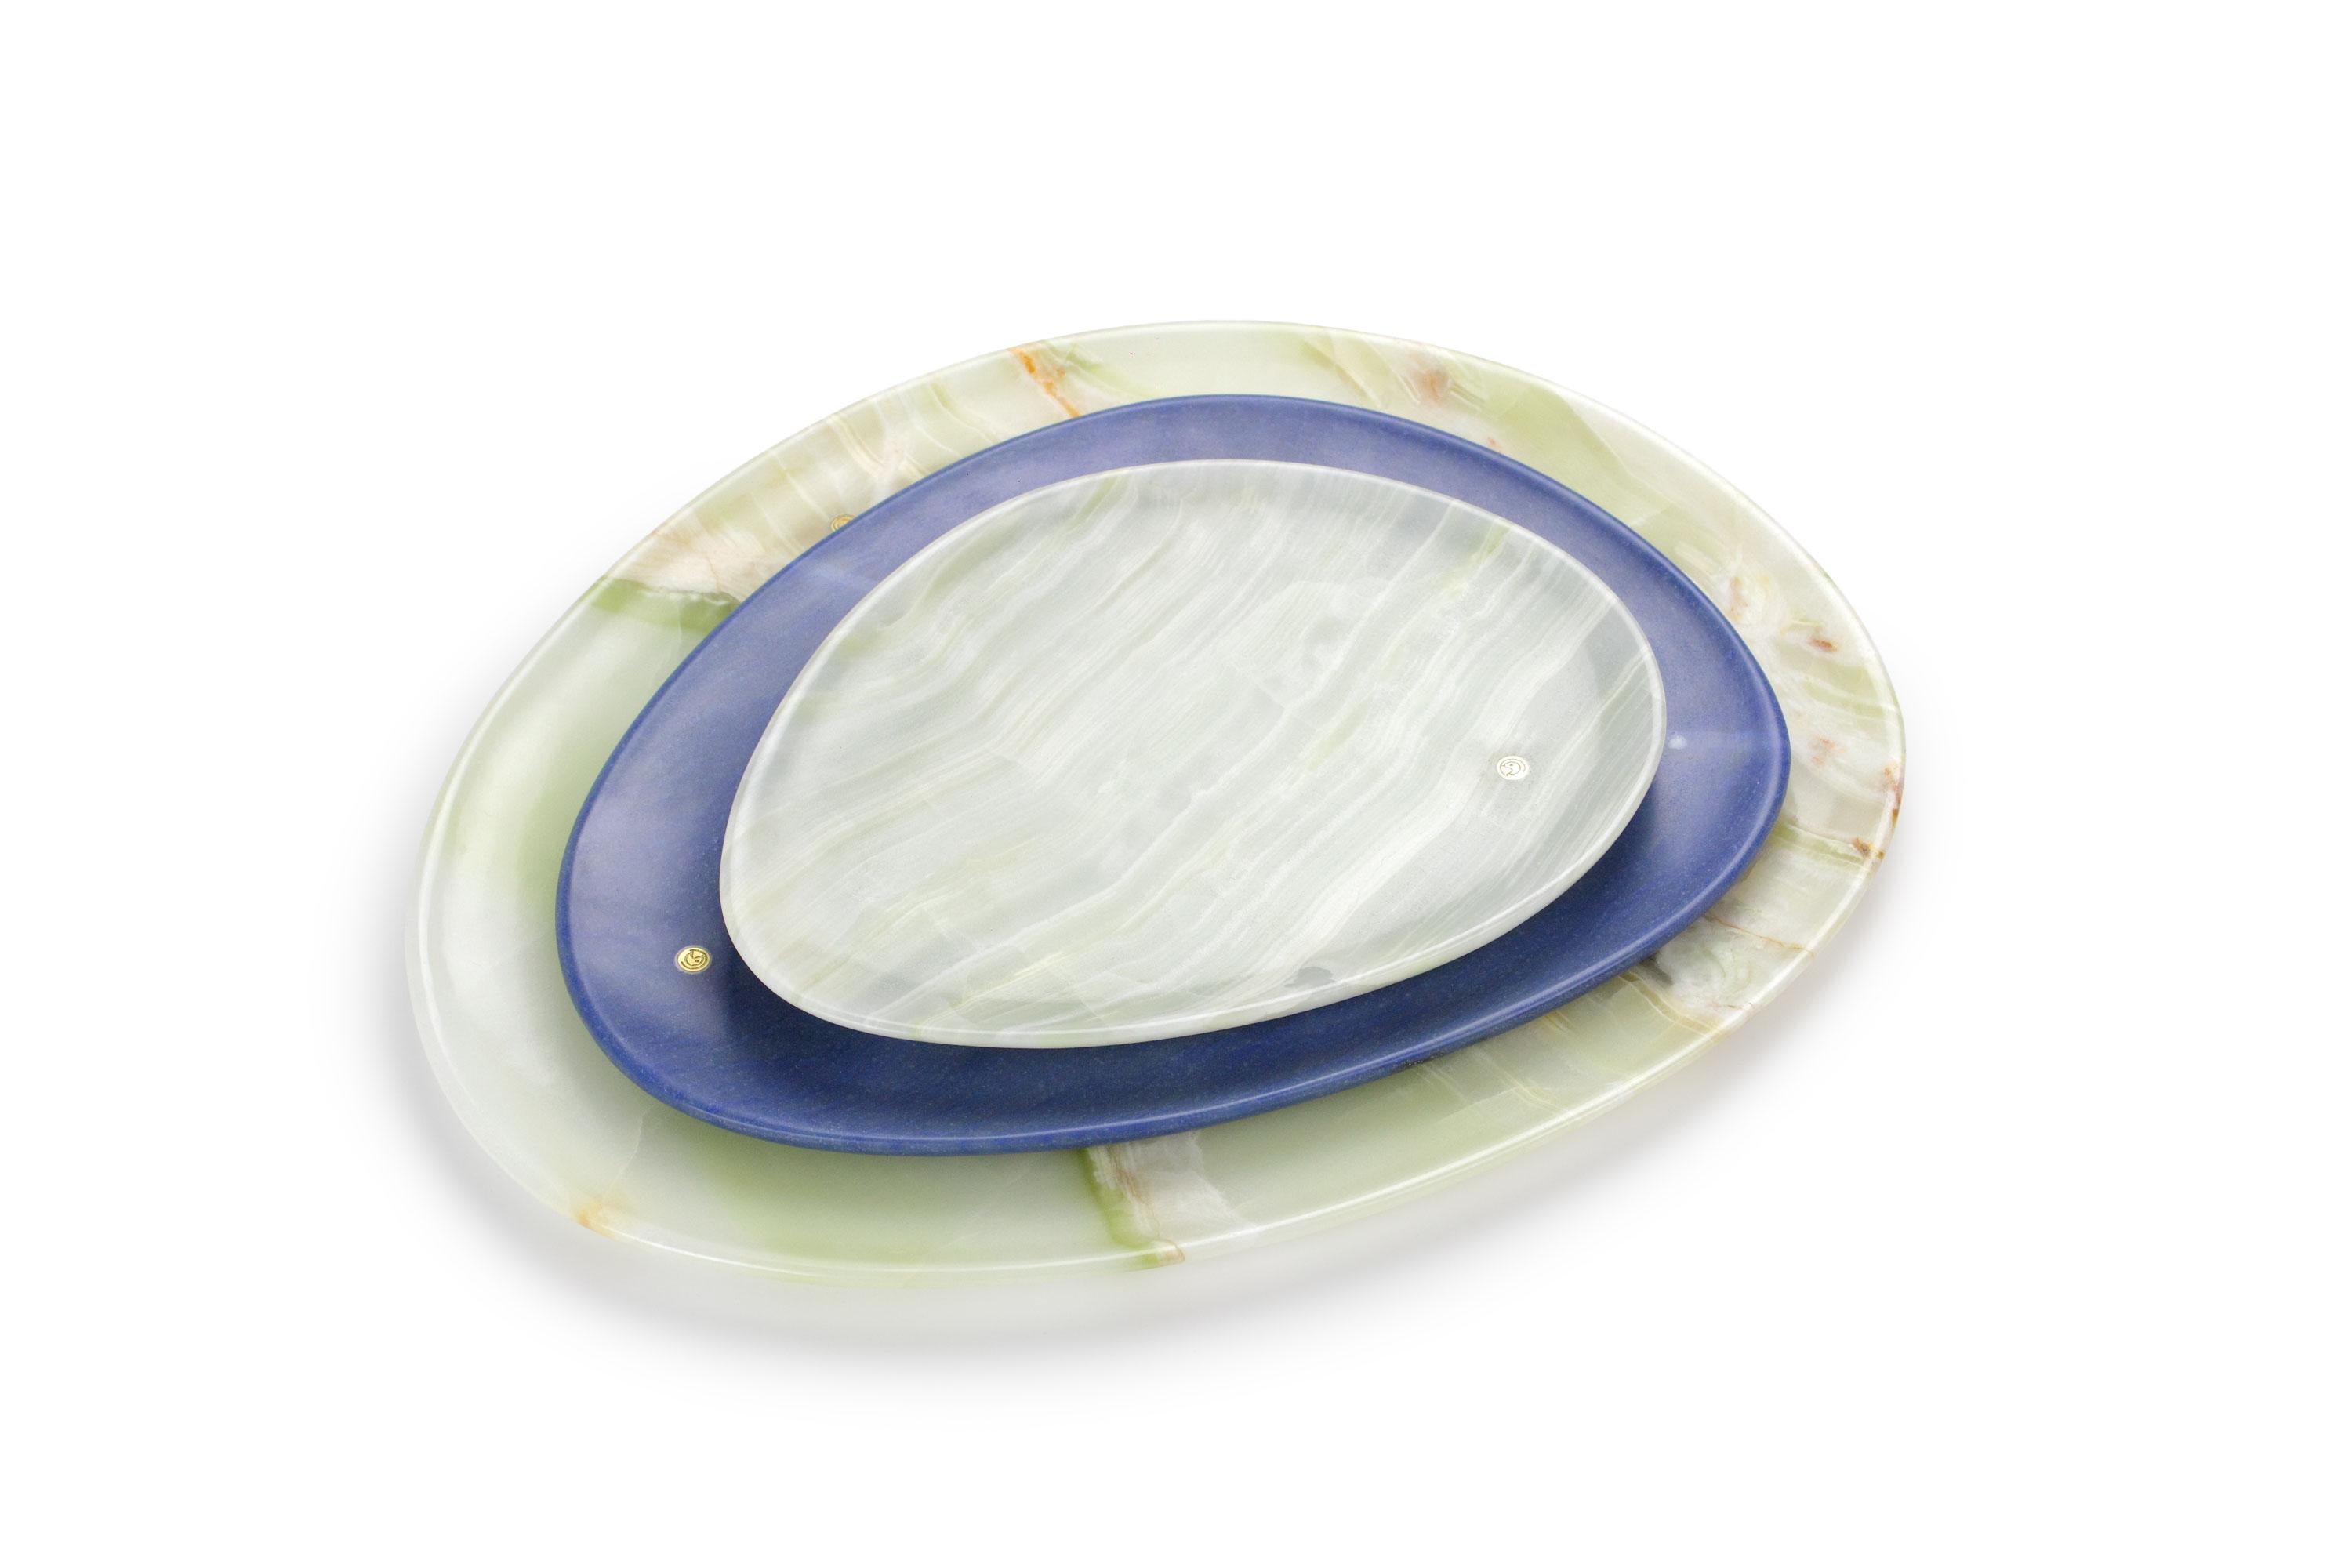 Hand carved presentation plates in green onyx and Azul Macaubas. 
Multiple use as plates, platters and placers. 

Dimensions: Small - L 24 W 20 H 1.8 cm, Medium - L 30 W 28 H 1.8 cm, Big - L 36 W 35 H 1.8 cm.
Available in different marbles, onyx and